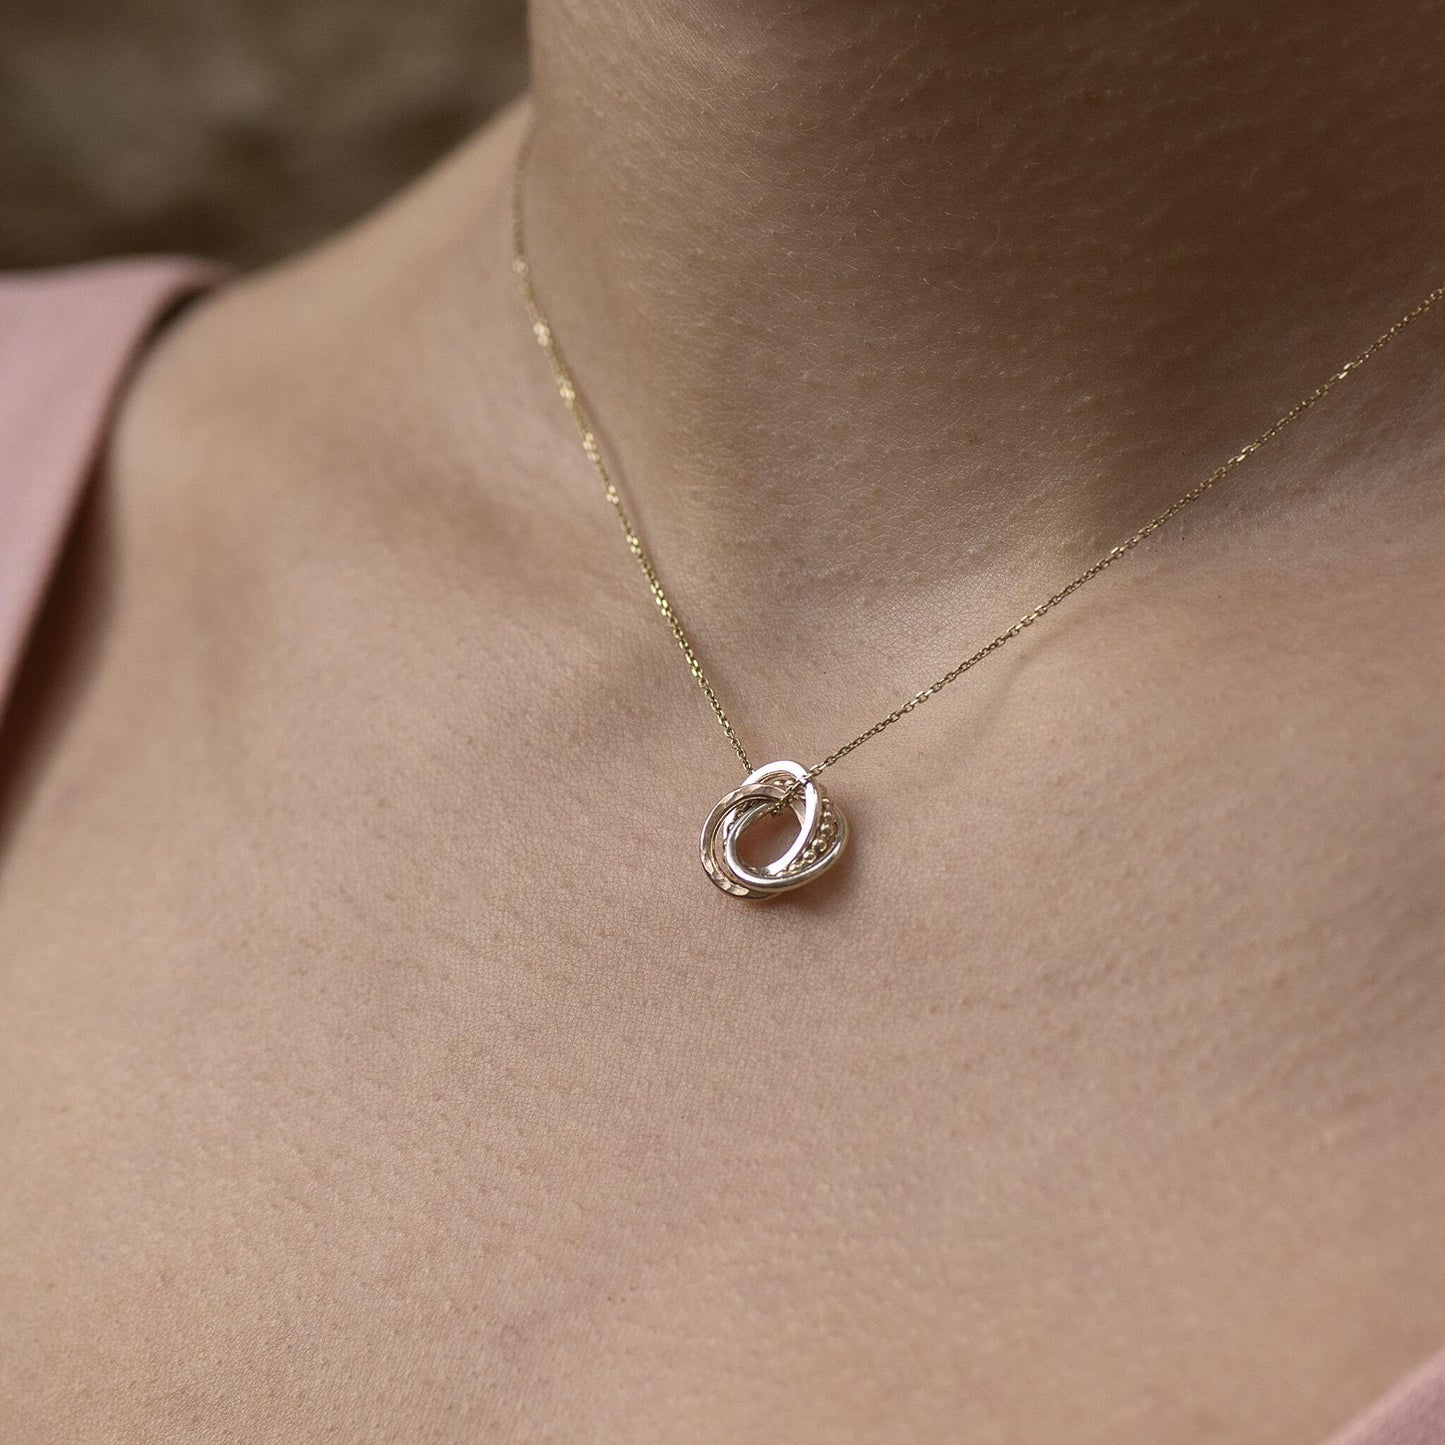 4 Links for 4 Loved Ones - Love Knot Necklace - 9kt Gold, Rose Gold, White Gold